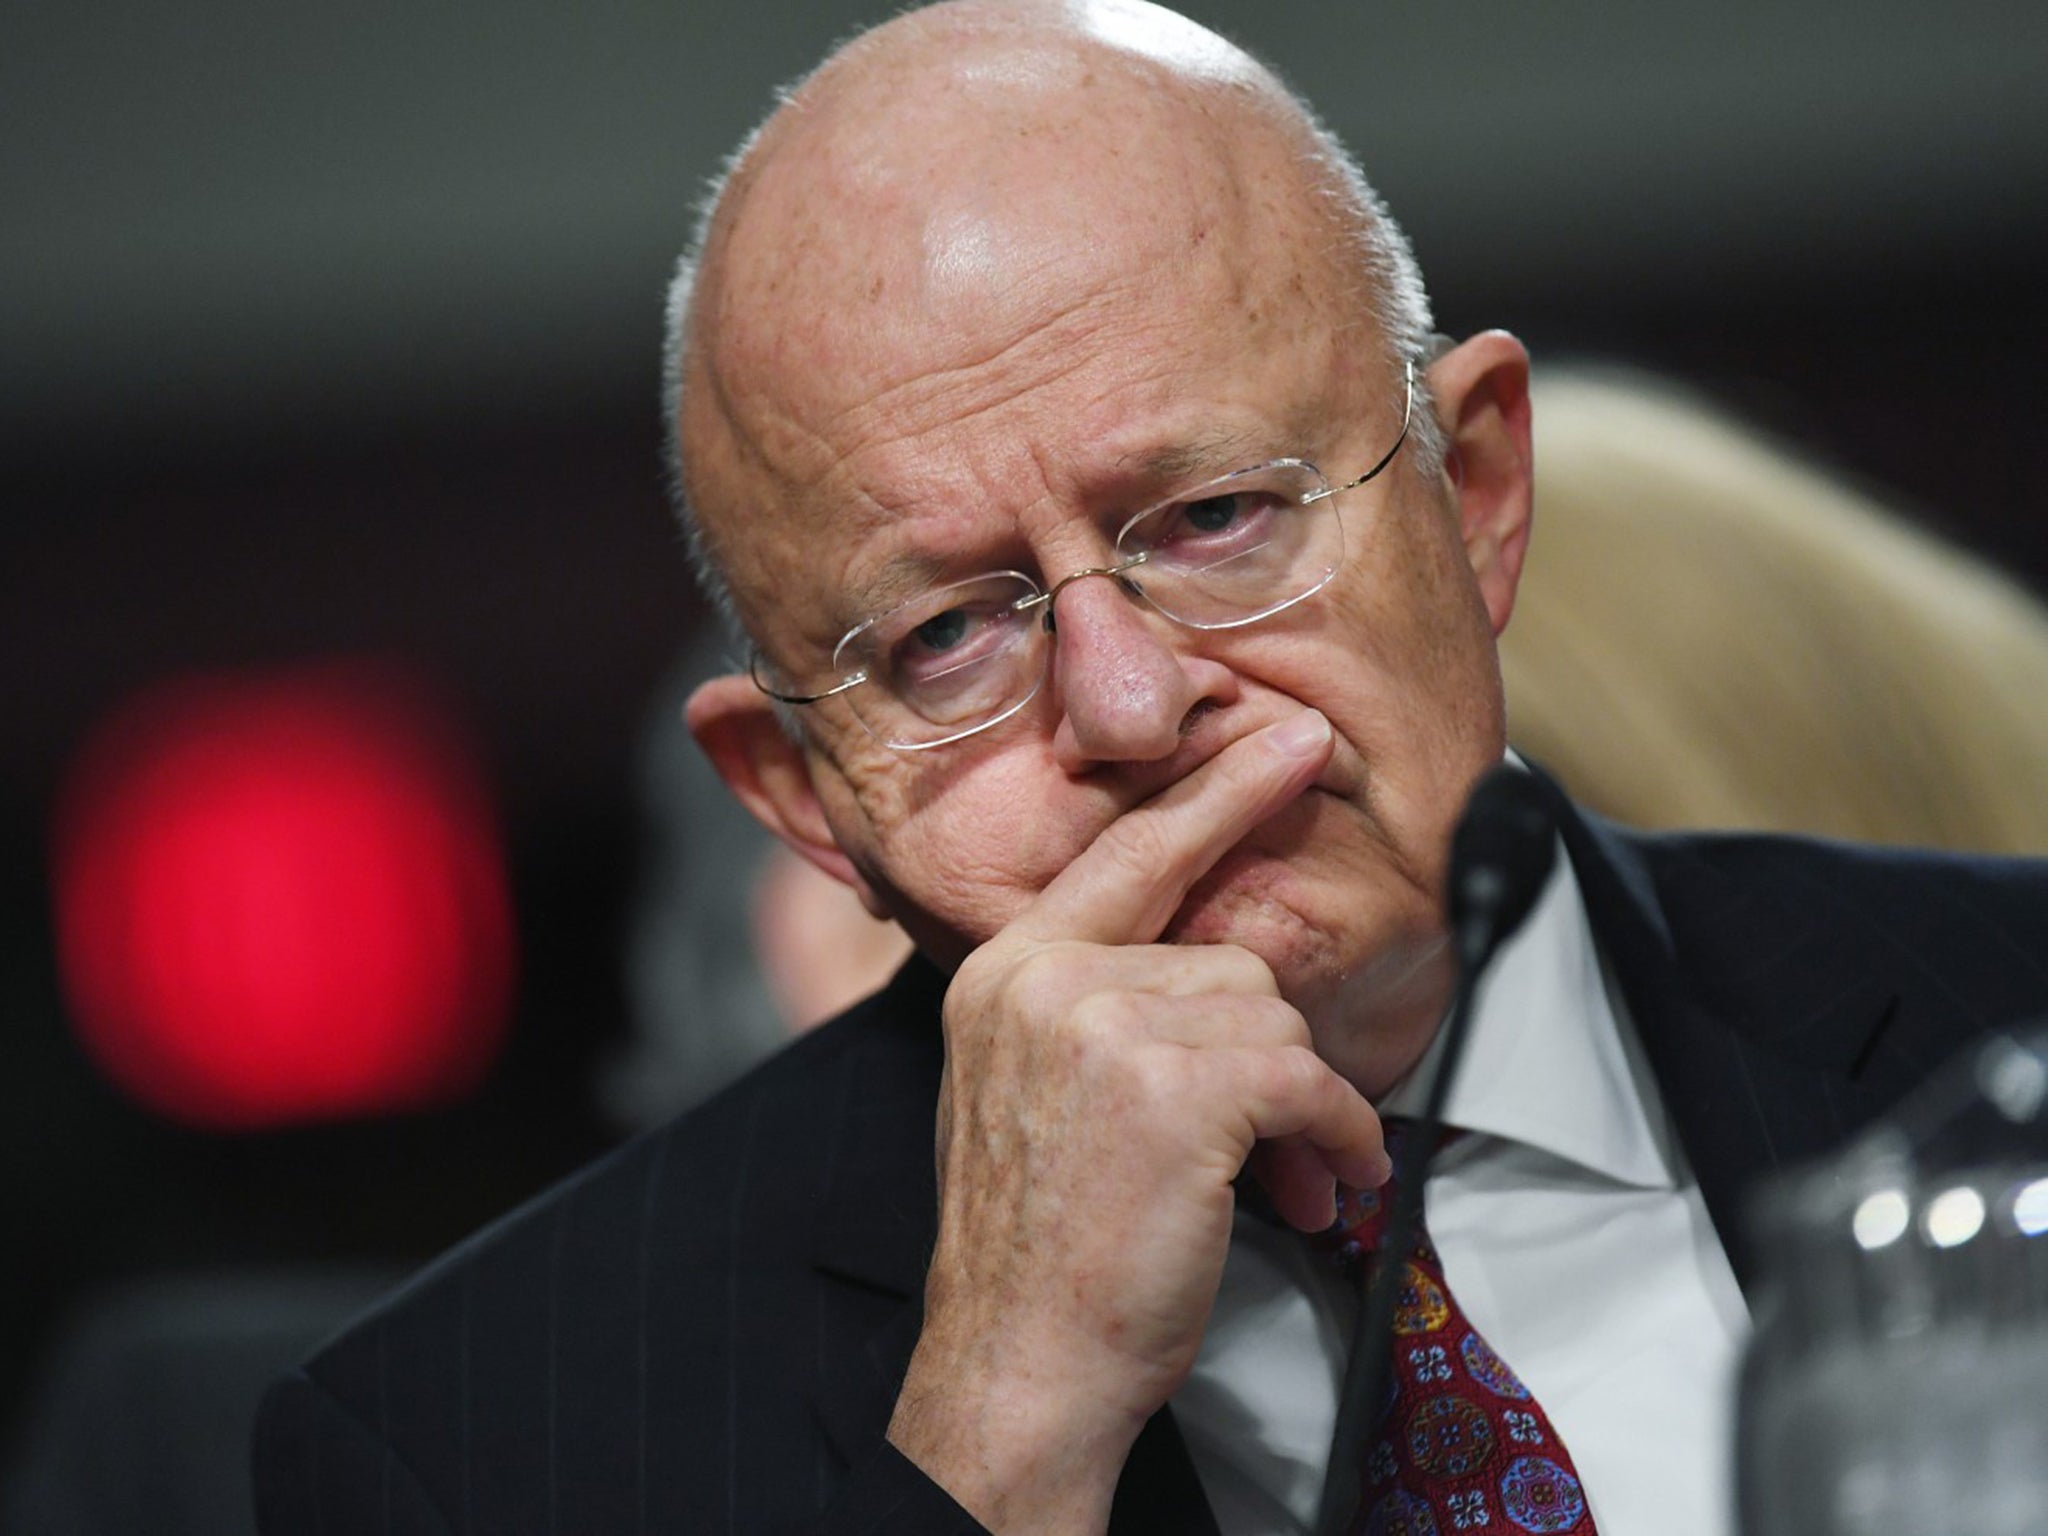 Director of National Intelligence James R. Clapper Jr. told the Senate Armed Services Committee on January 5 that Russia meddled in the US election through hacking, propaganda and fake news